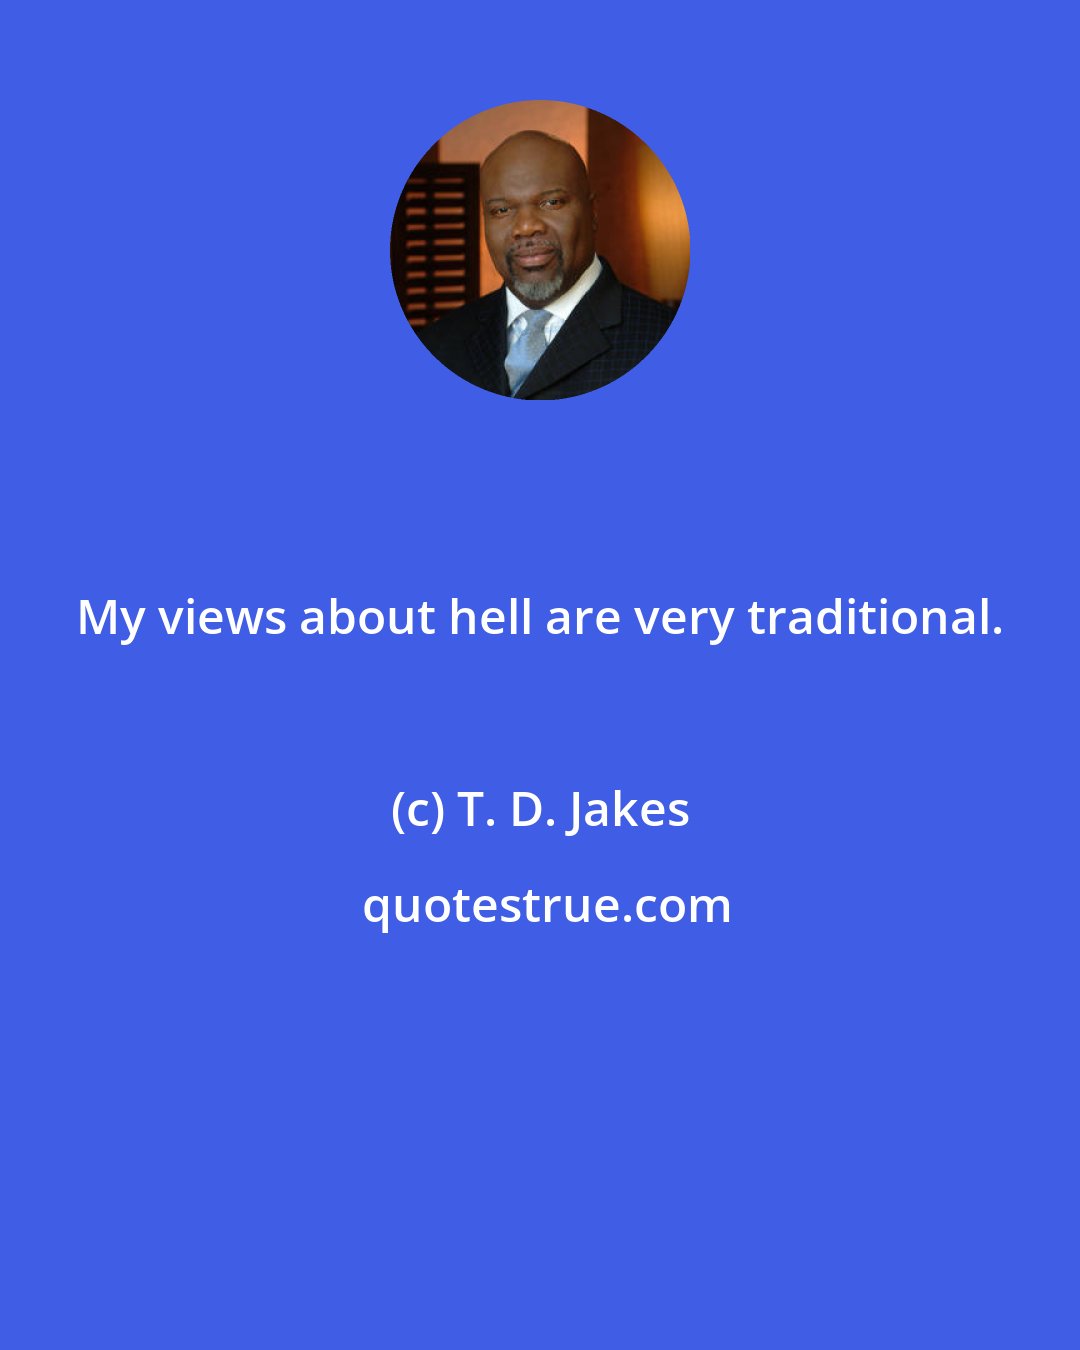 T. D. Jakes: My views about hell are very traditional.